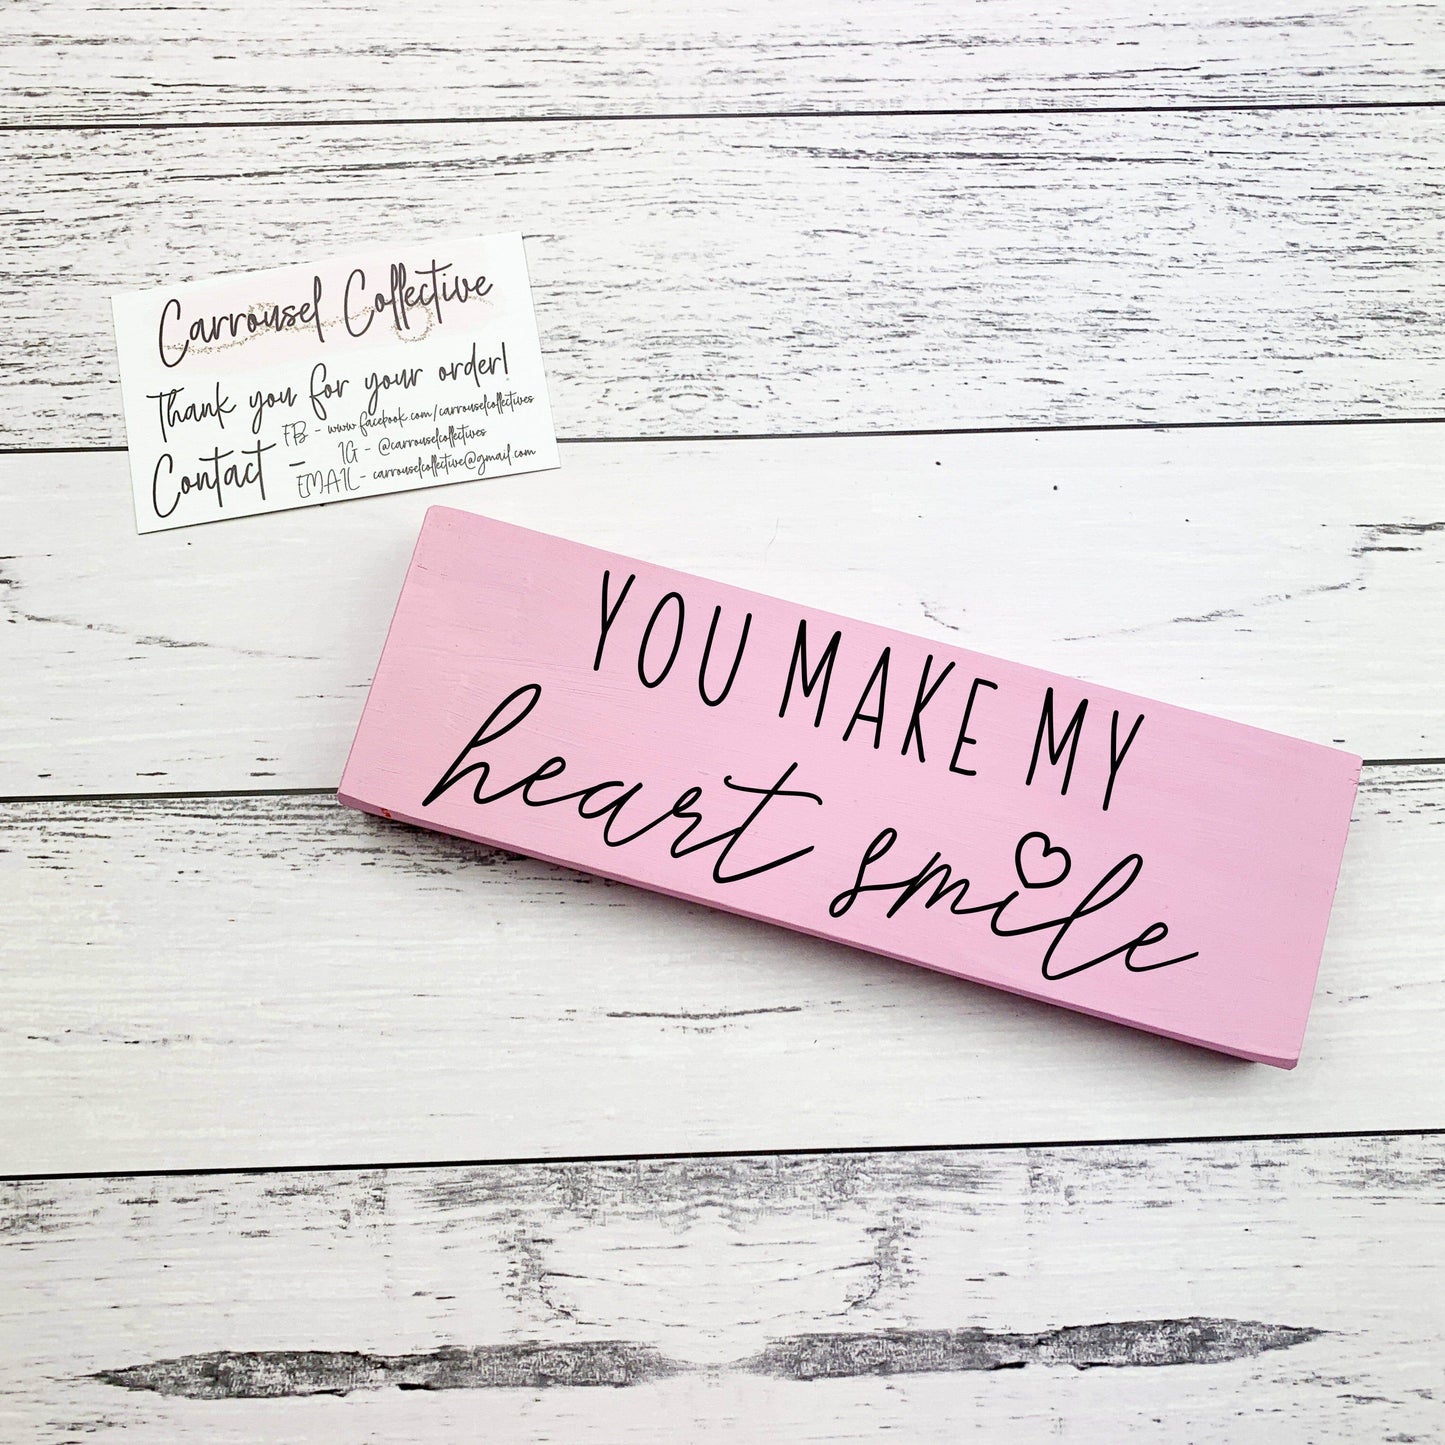 You Make my Heart Smile - Valentines Wood sign